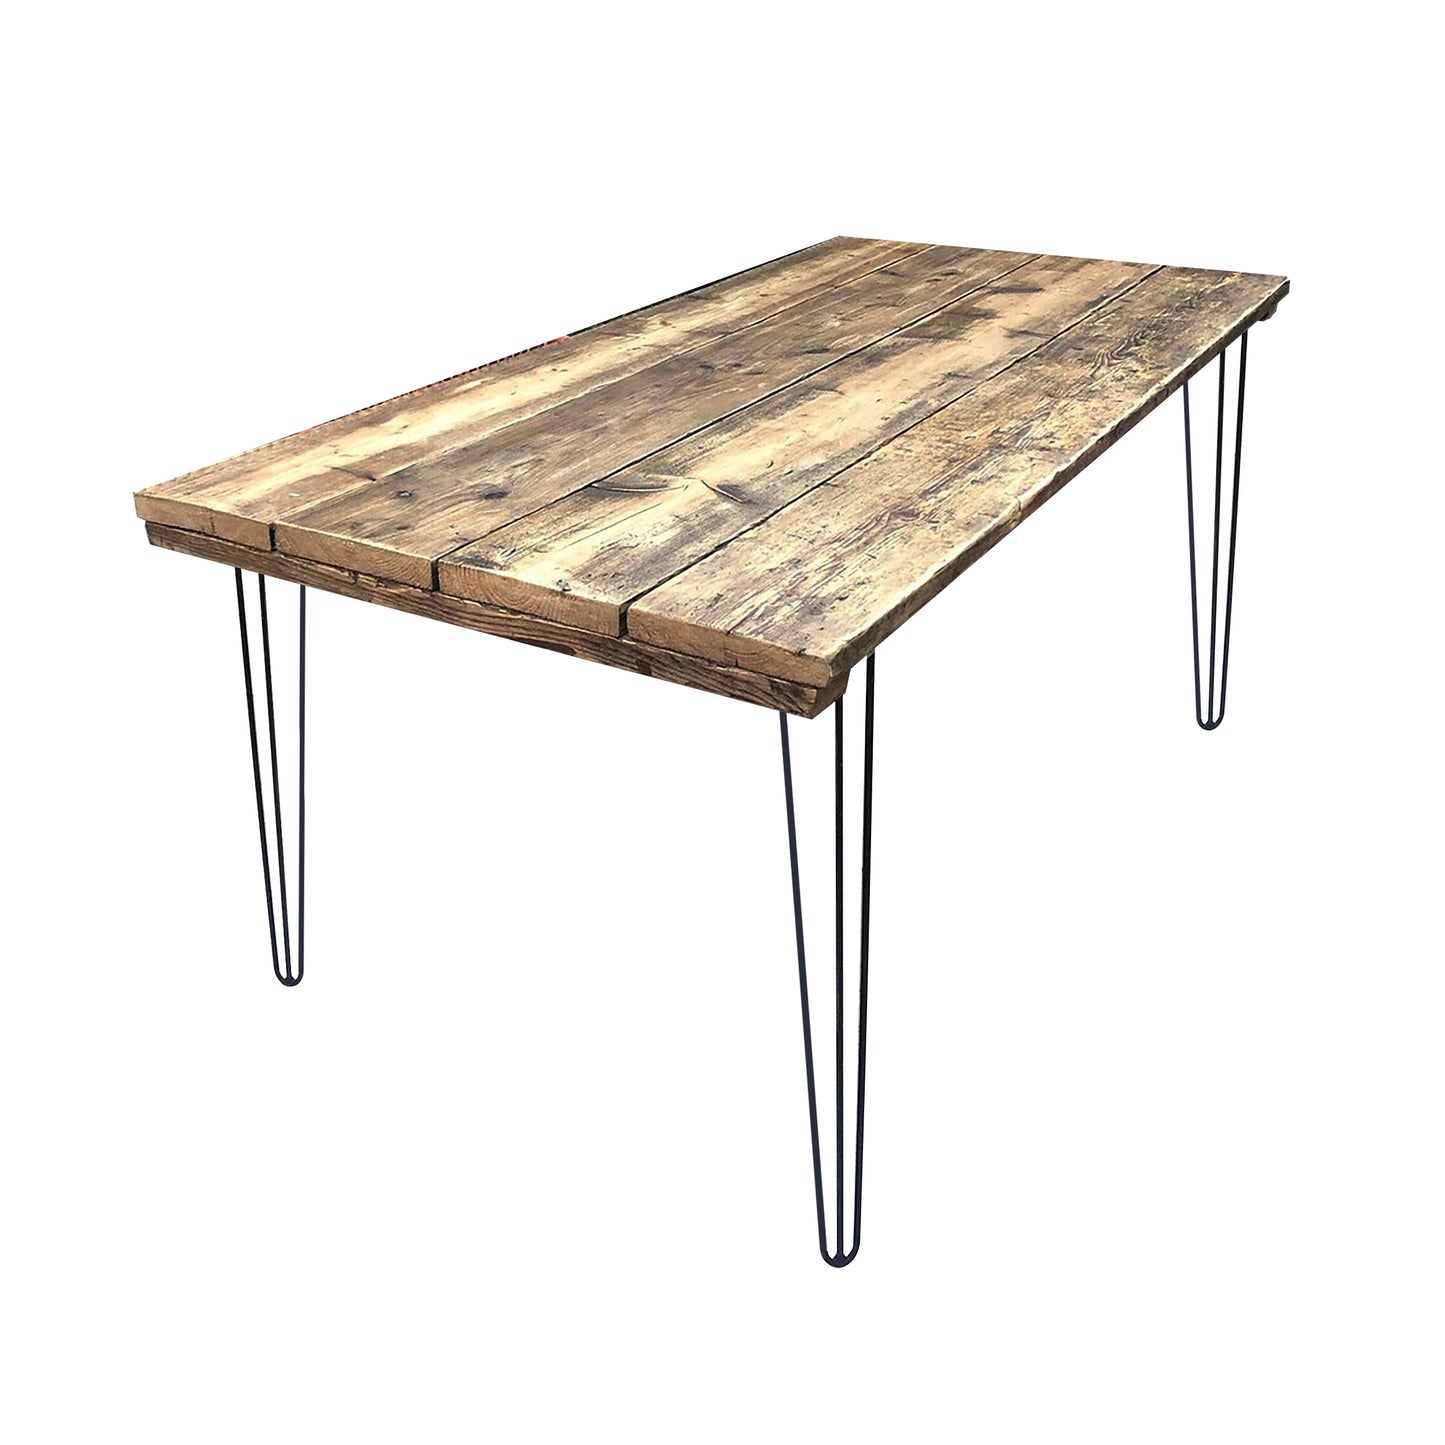 2. Outdoor Reclaimed Scaffold Board Dining Tables